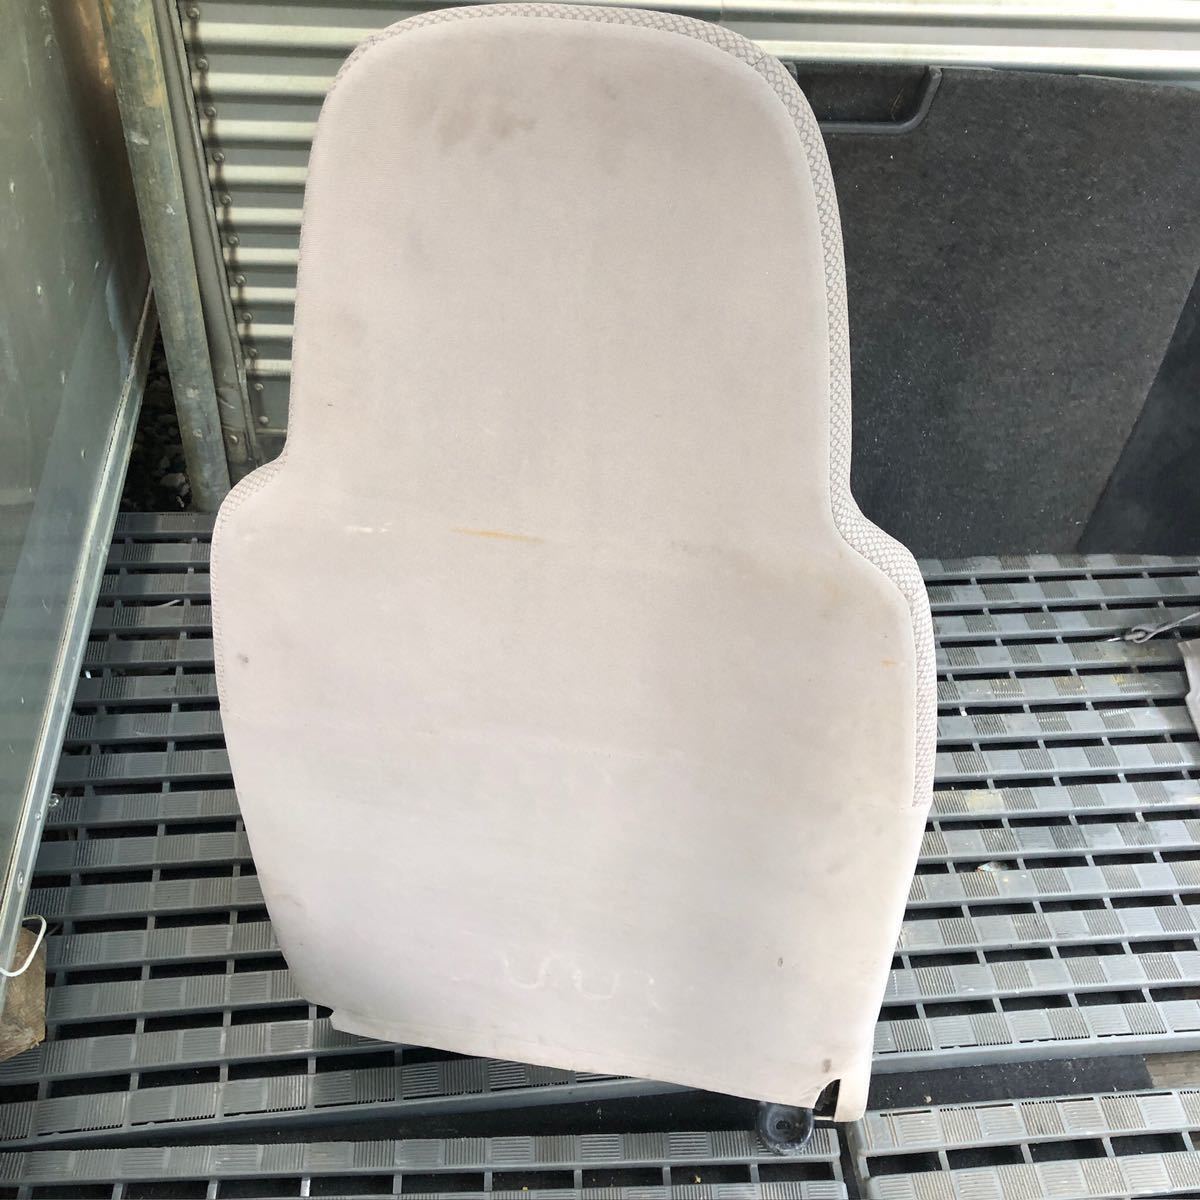  Toyota Toyoace Truck KDY281 seat driver`s seat side seat 038 [FKDY281-R509-01]